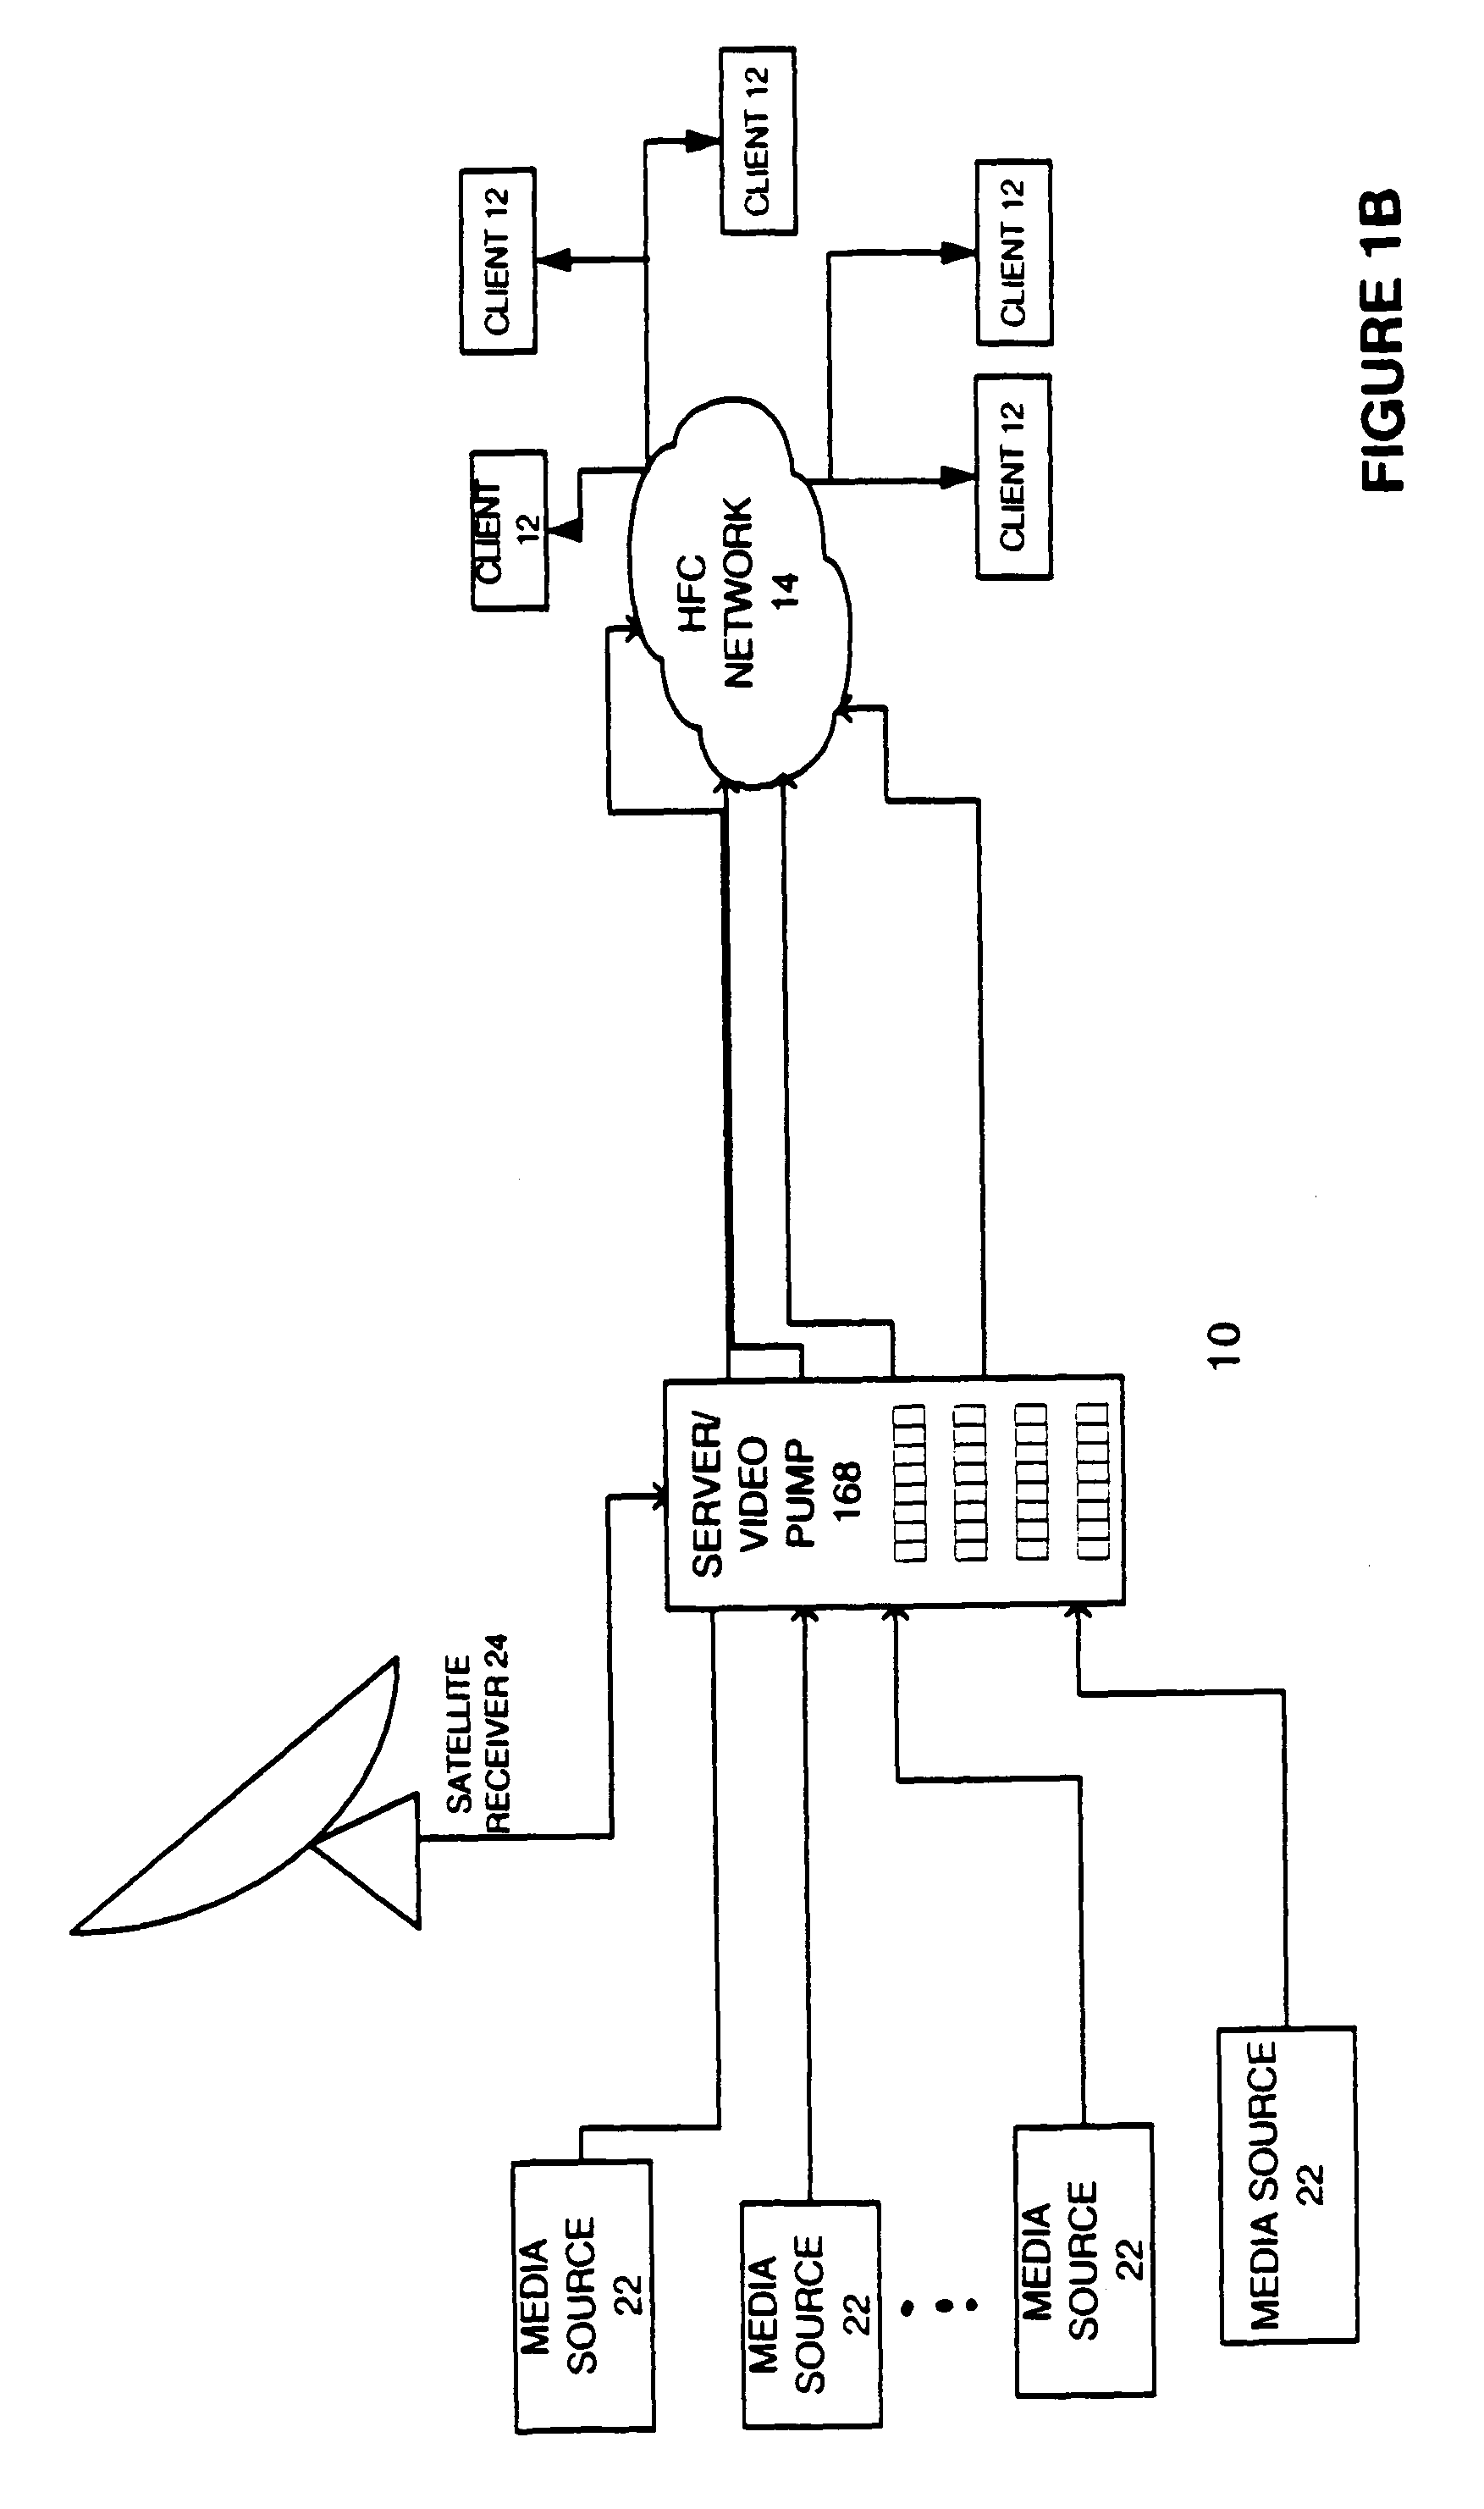 System and method for providing trick modes